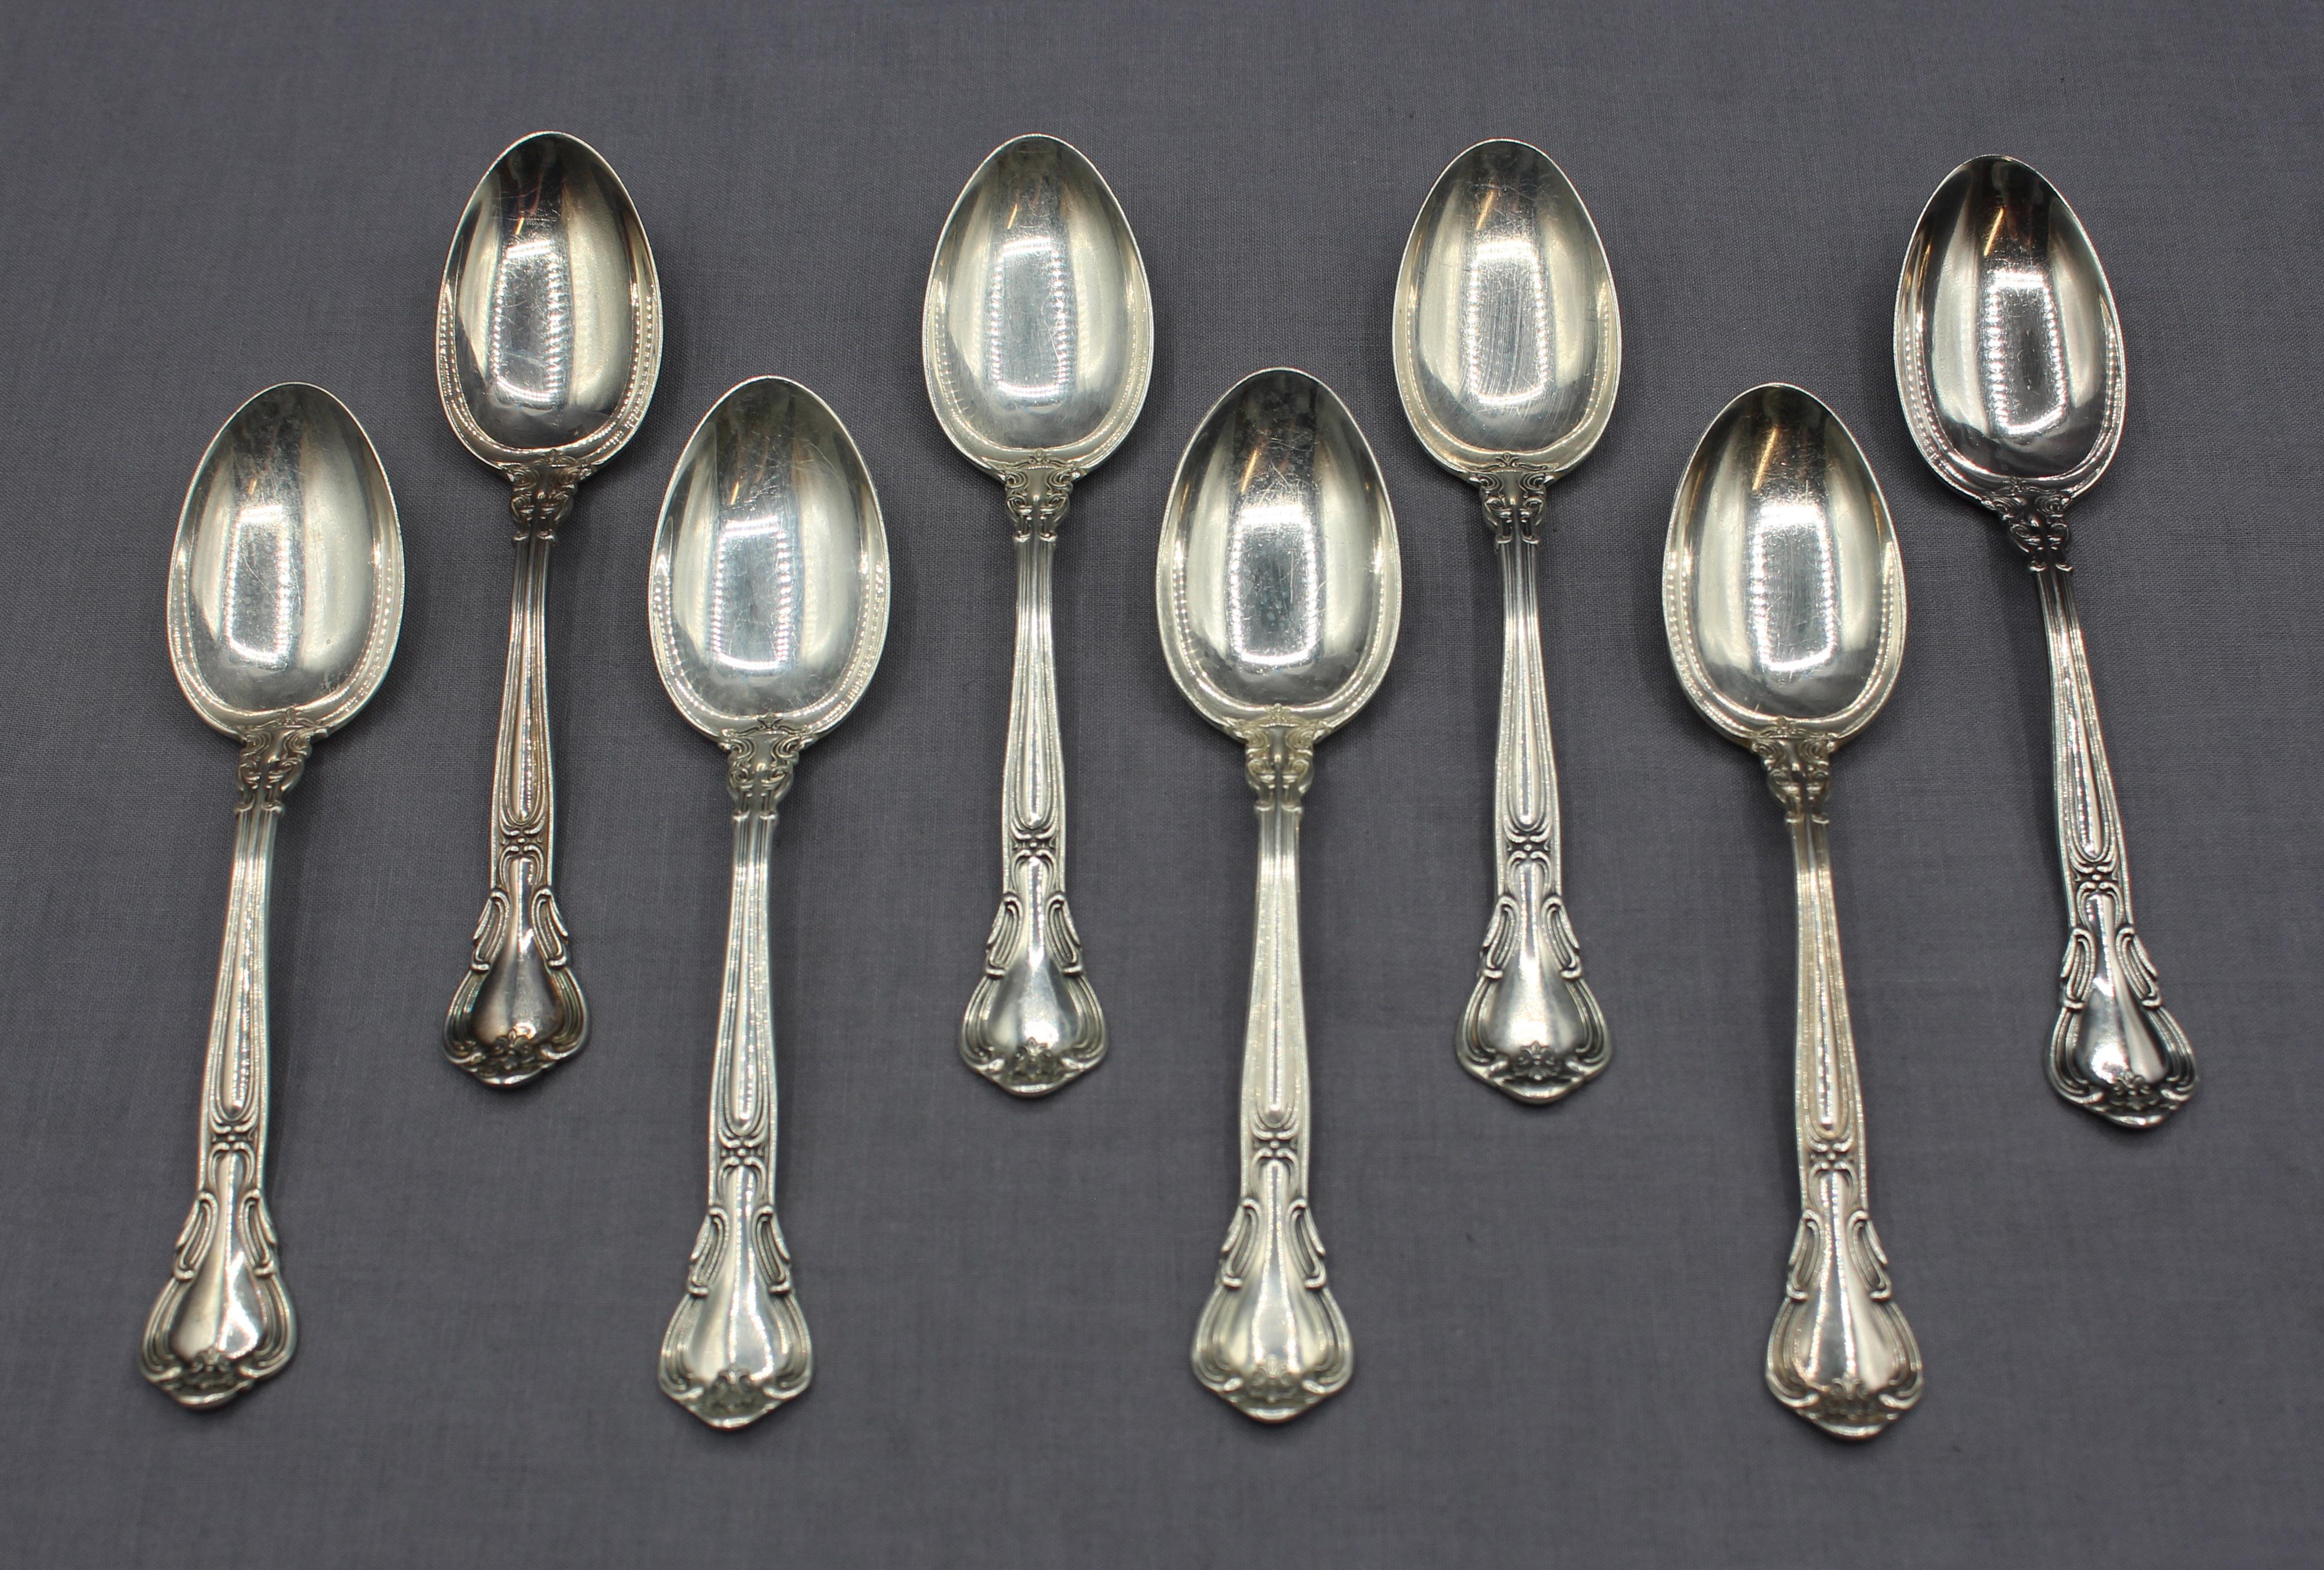 20th Century c. 1950s Sterling Silver Chantilly Pattern Flatware Set by Gorham